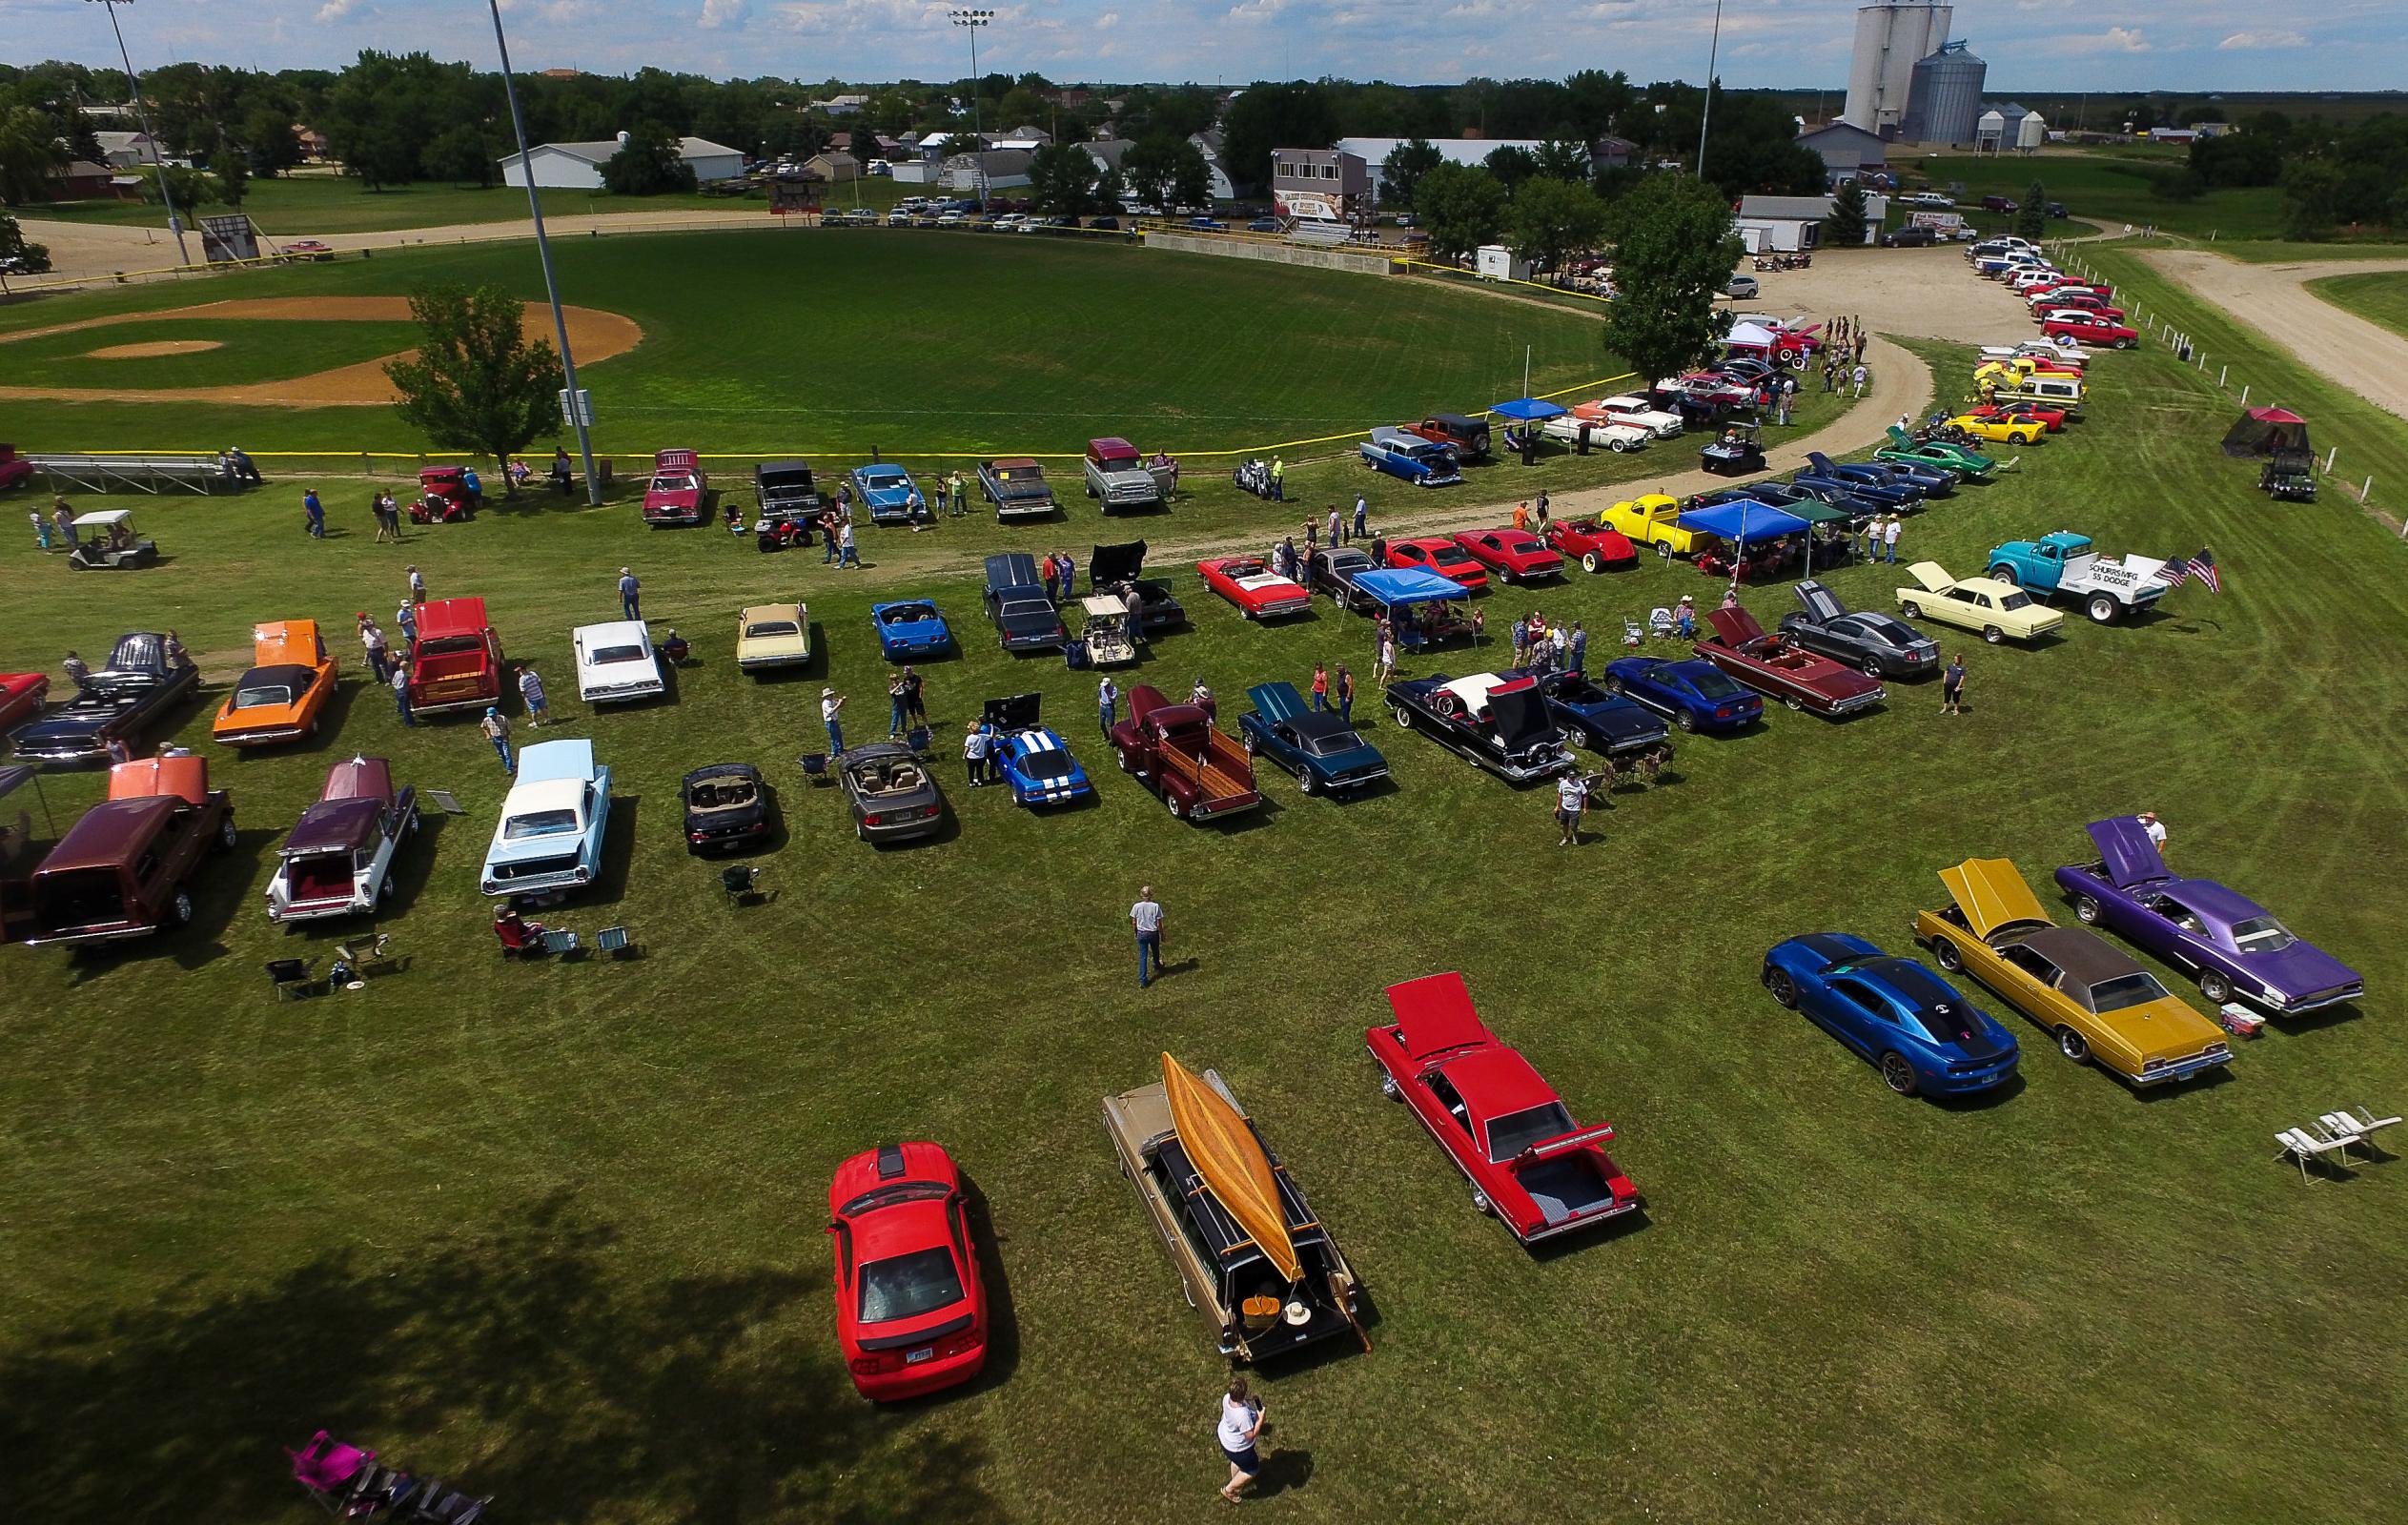 Car Show Drone Pic's image